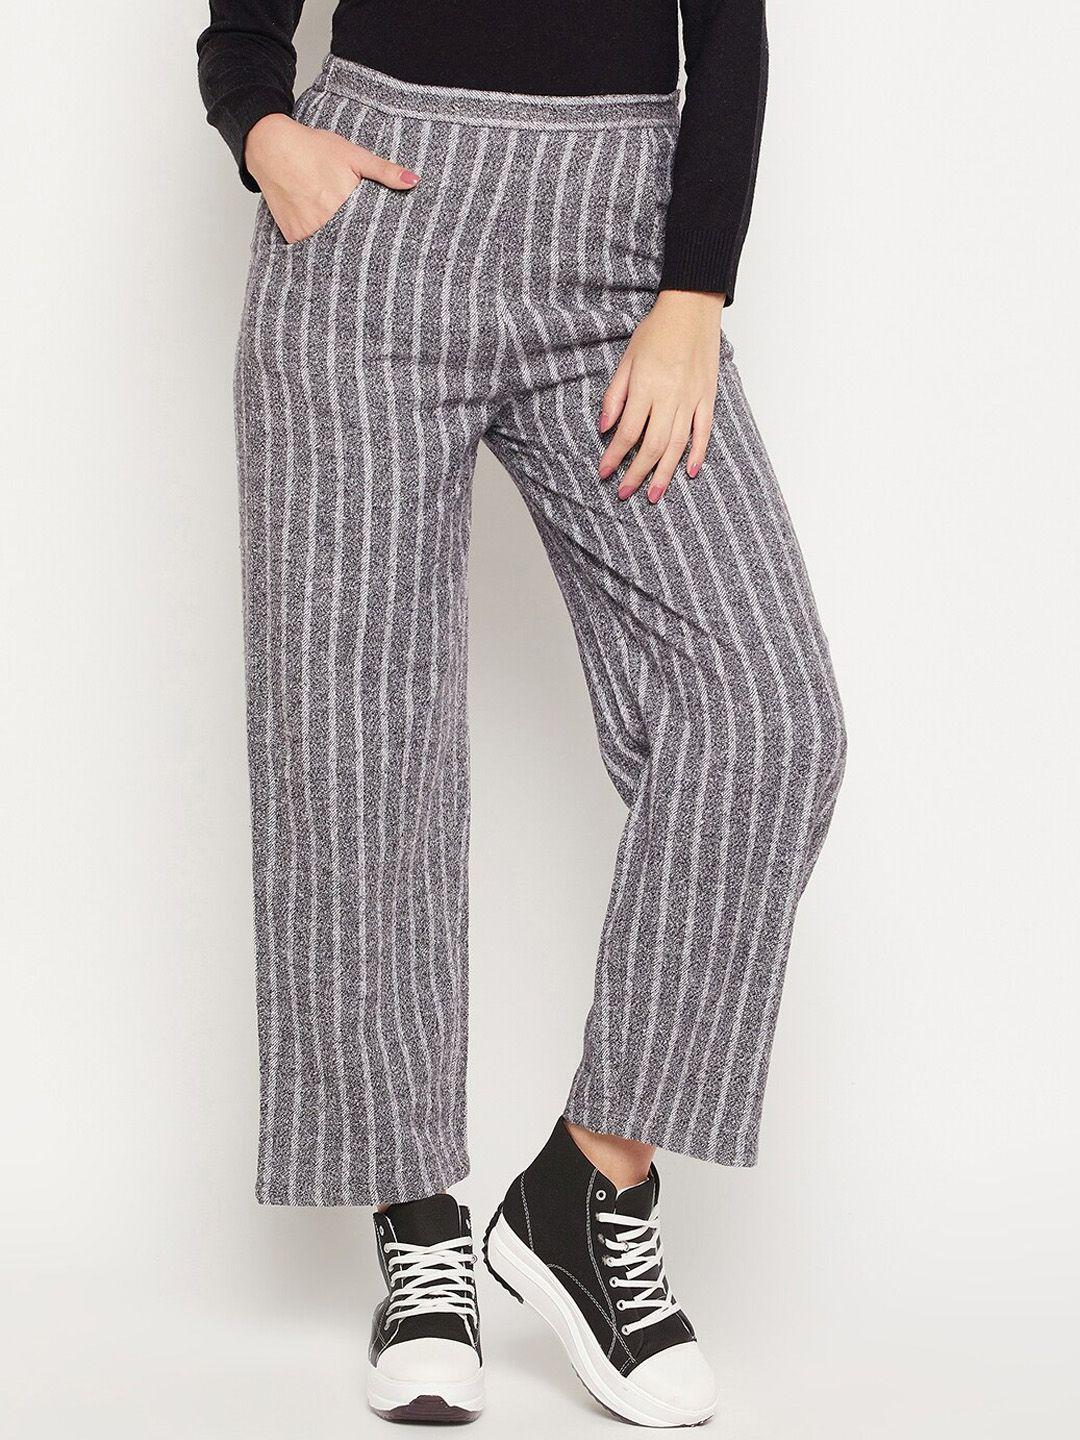 bitterlime-women-striped-relaxed-flared-wrinkle-free-cotton-trousers